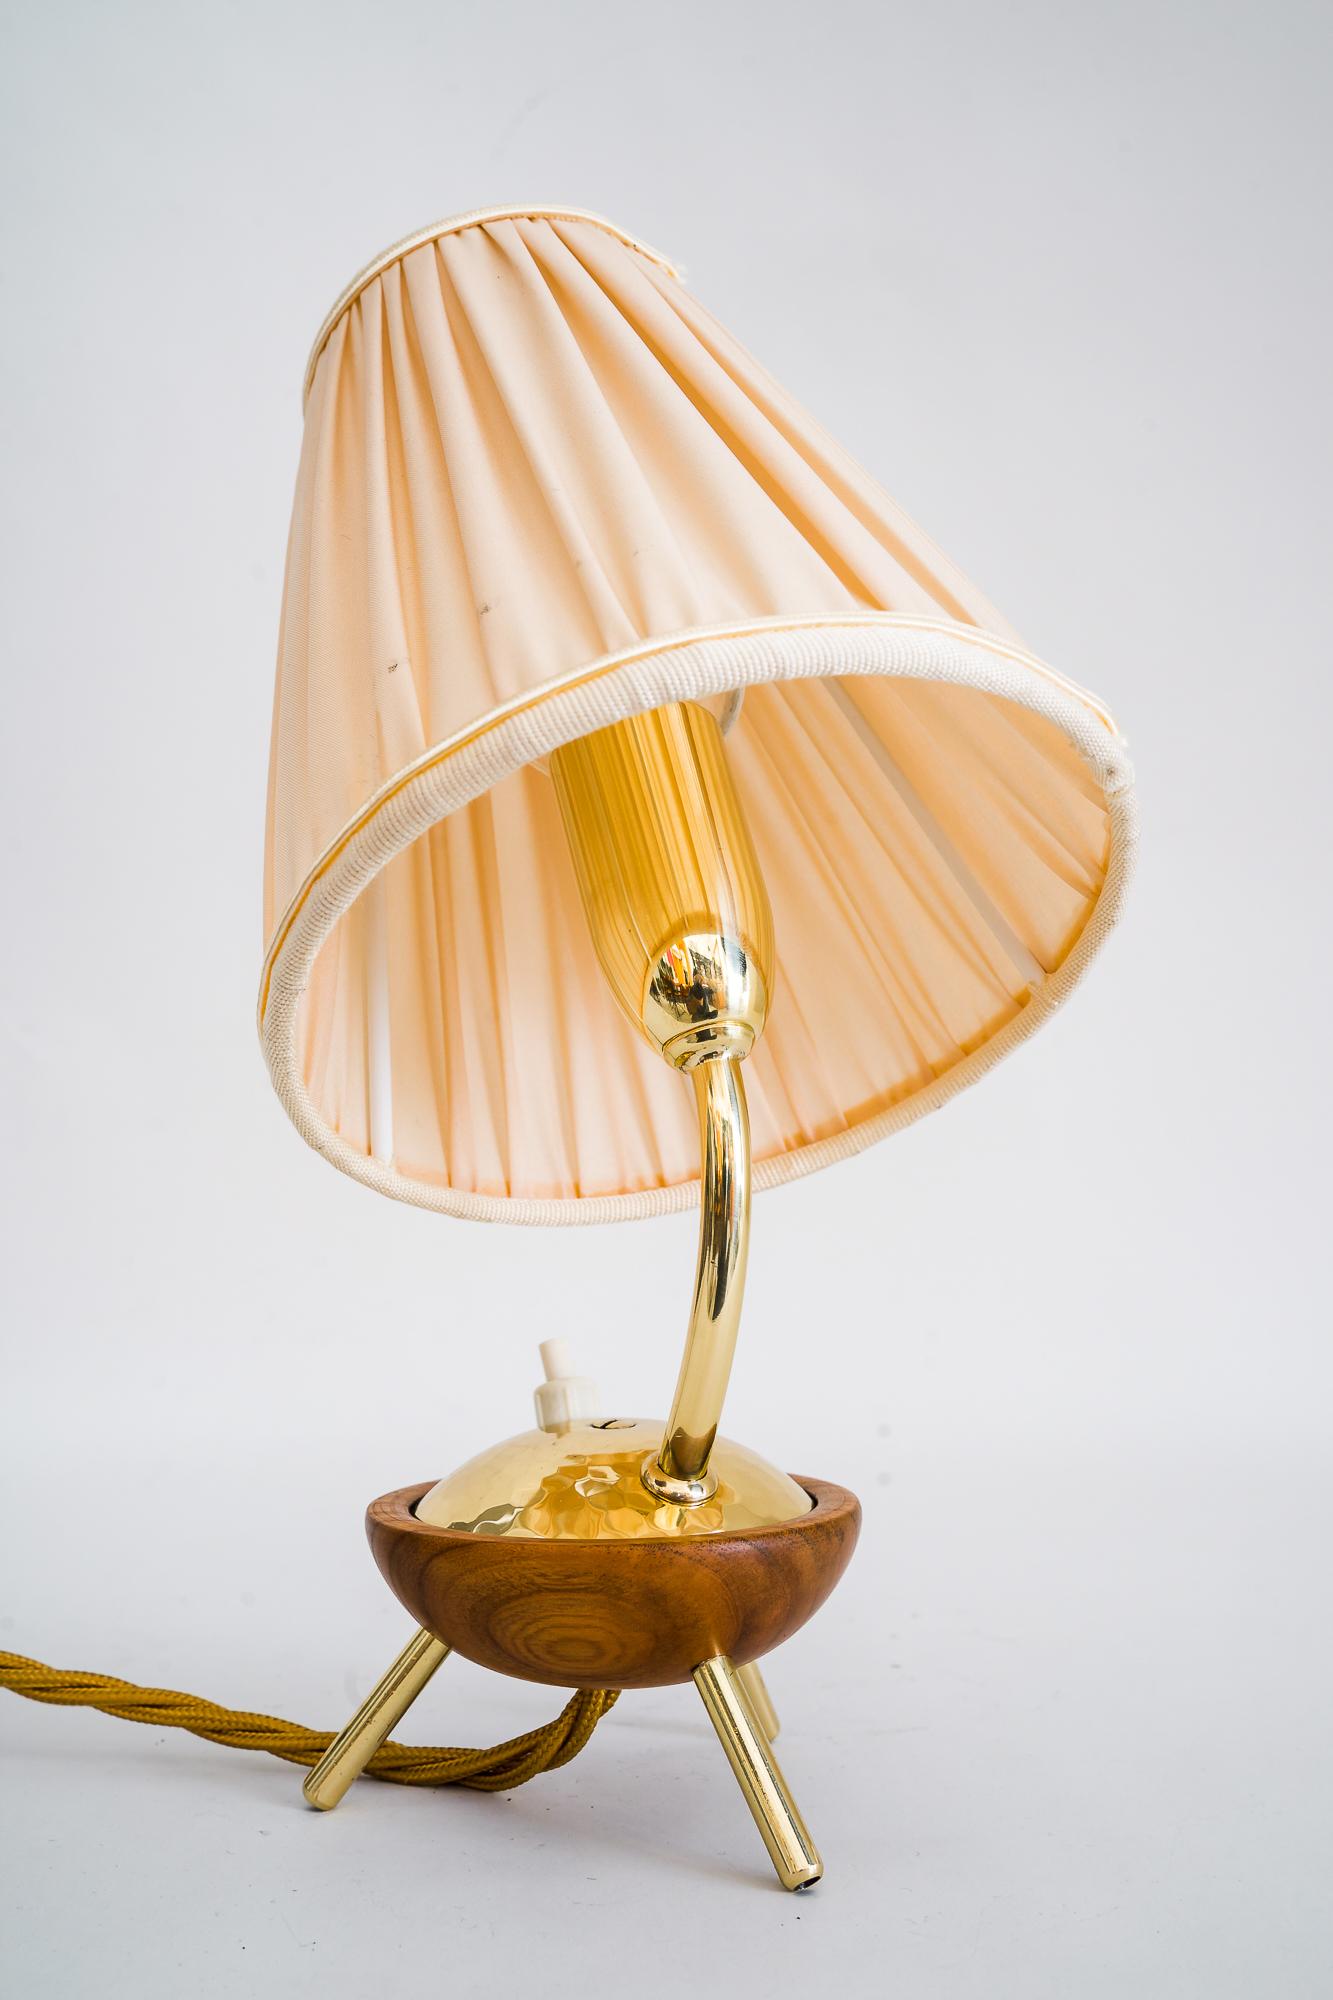 Lacquered Rupert Nikoll Table Lamp, Vienna, 1950s